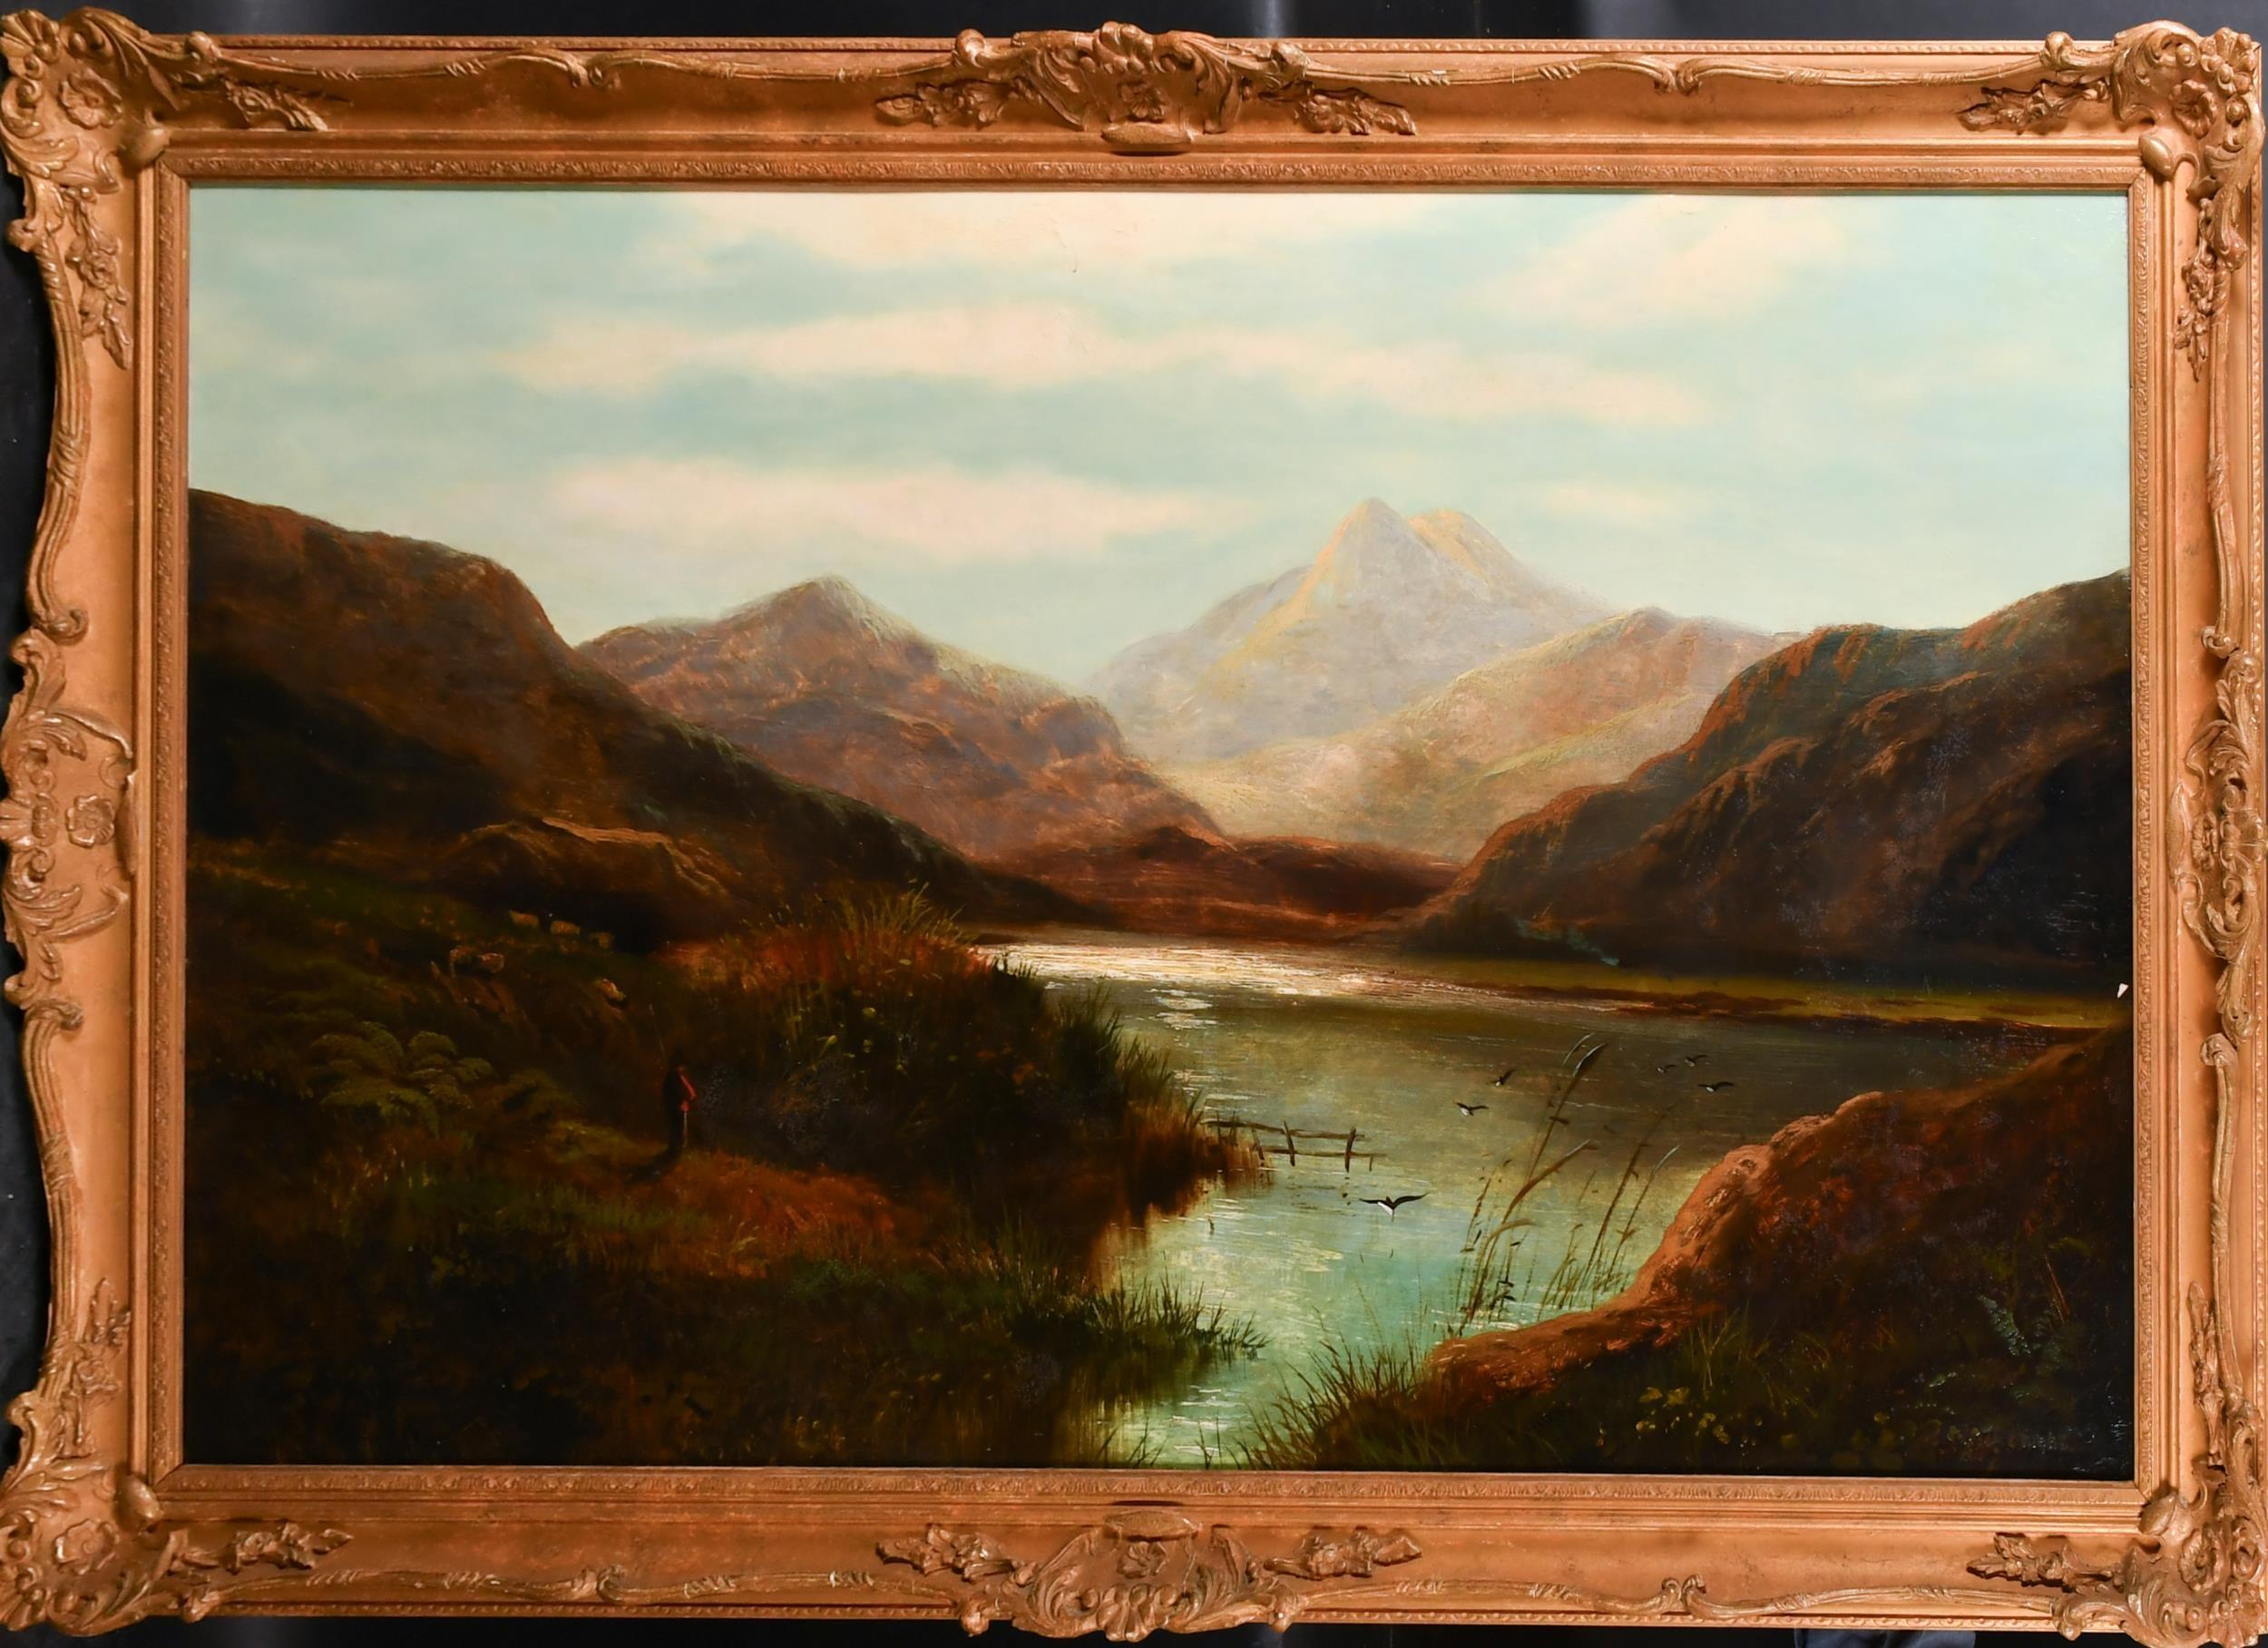 Joseph Knight (1837-1909) Landscape Painting - Huge Victorian Signed Oil Painting Scottish Highland Loch Figure Admiring View